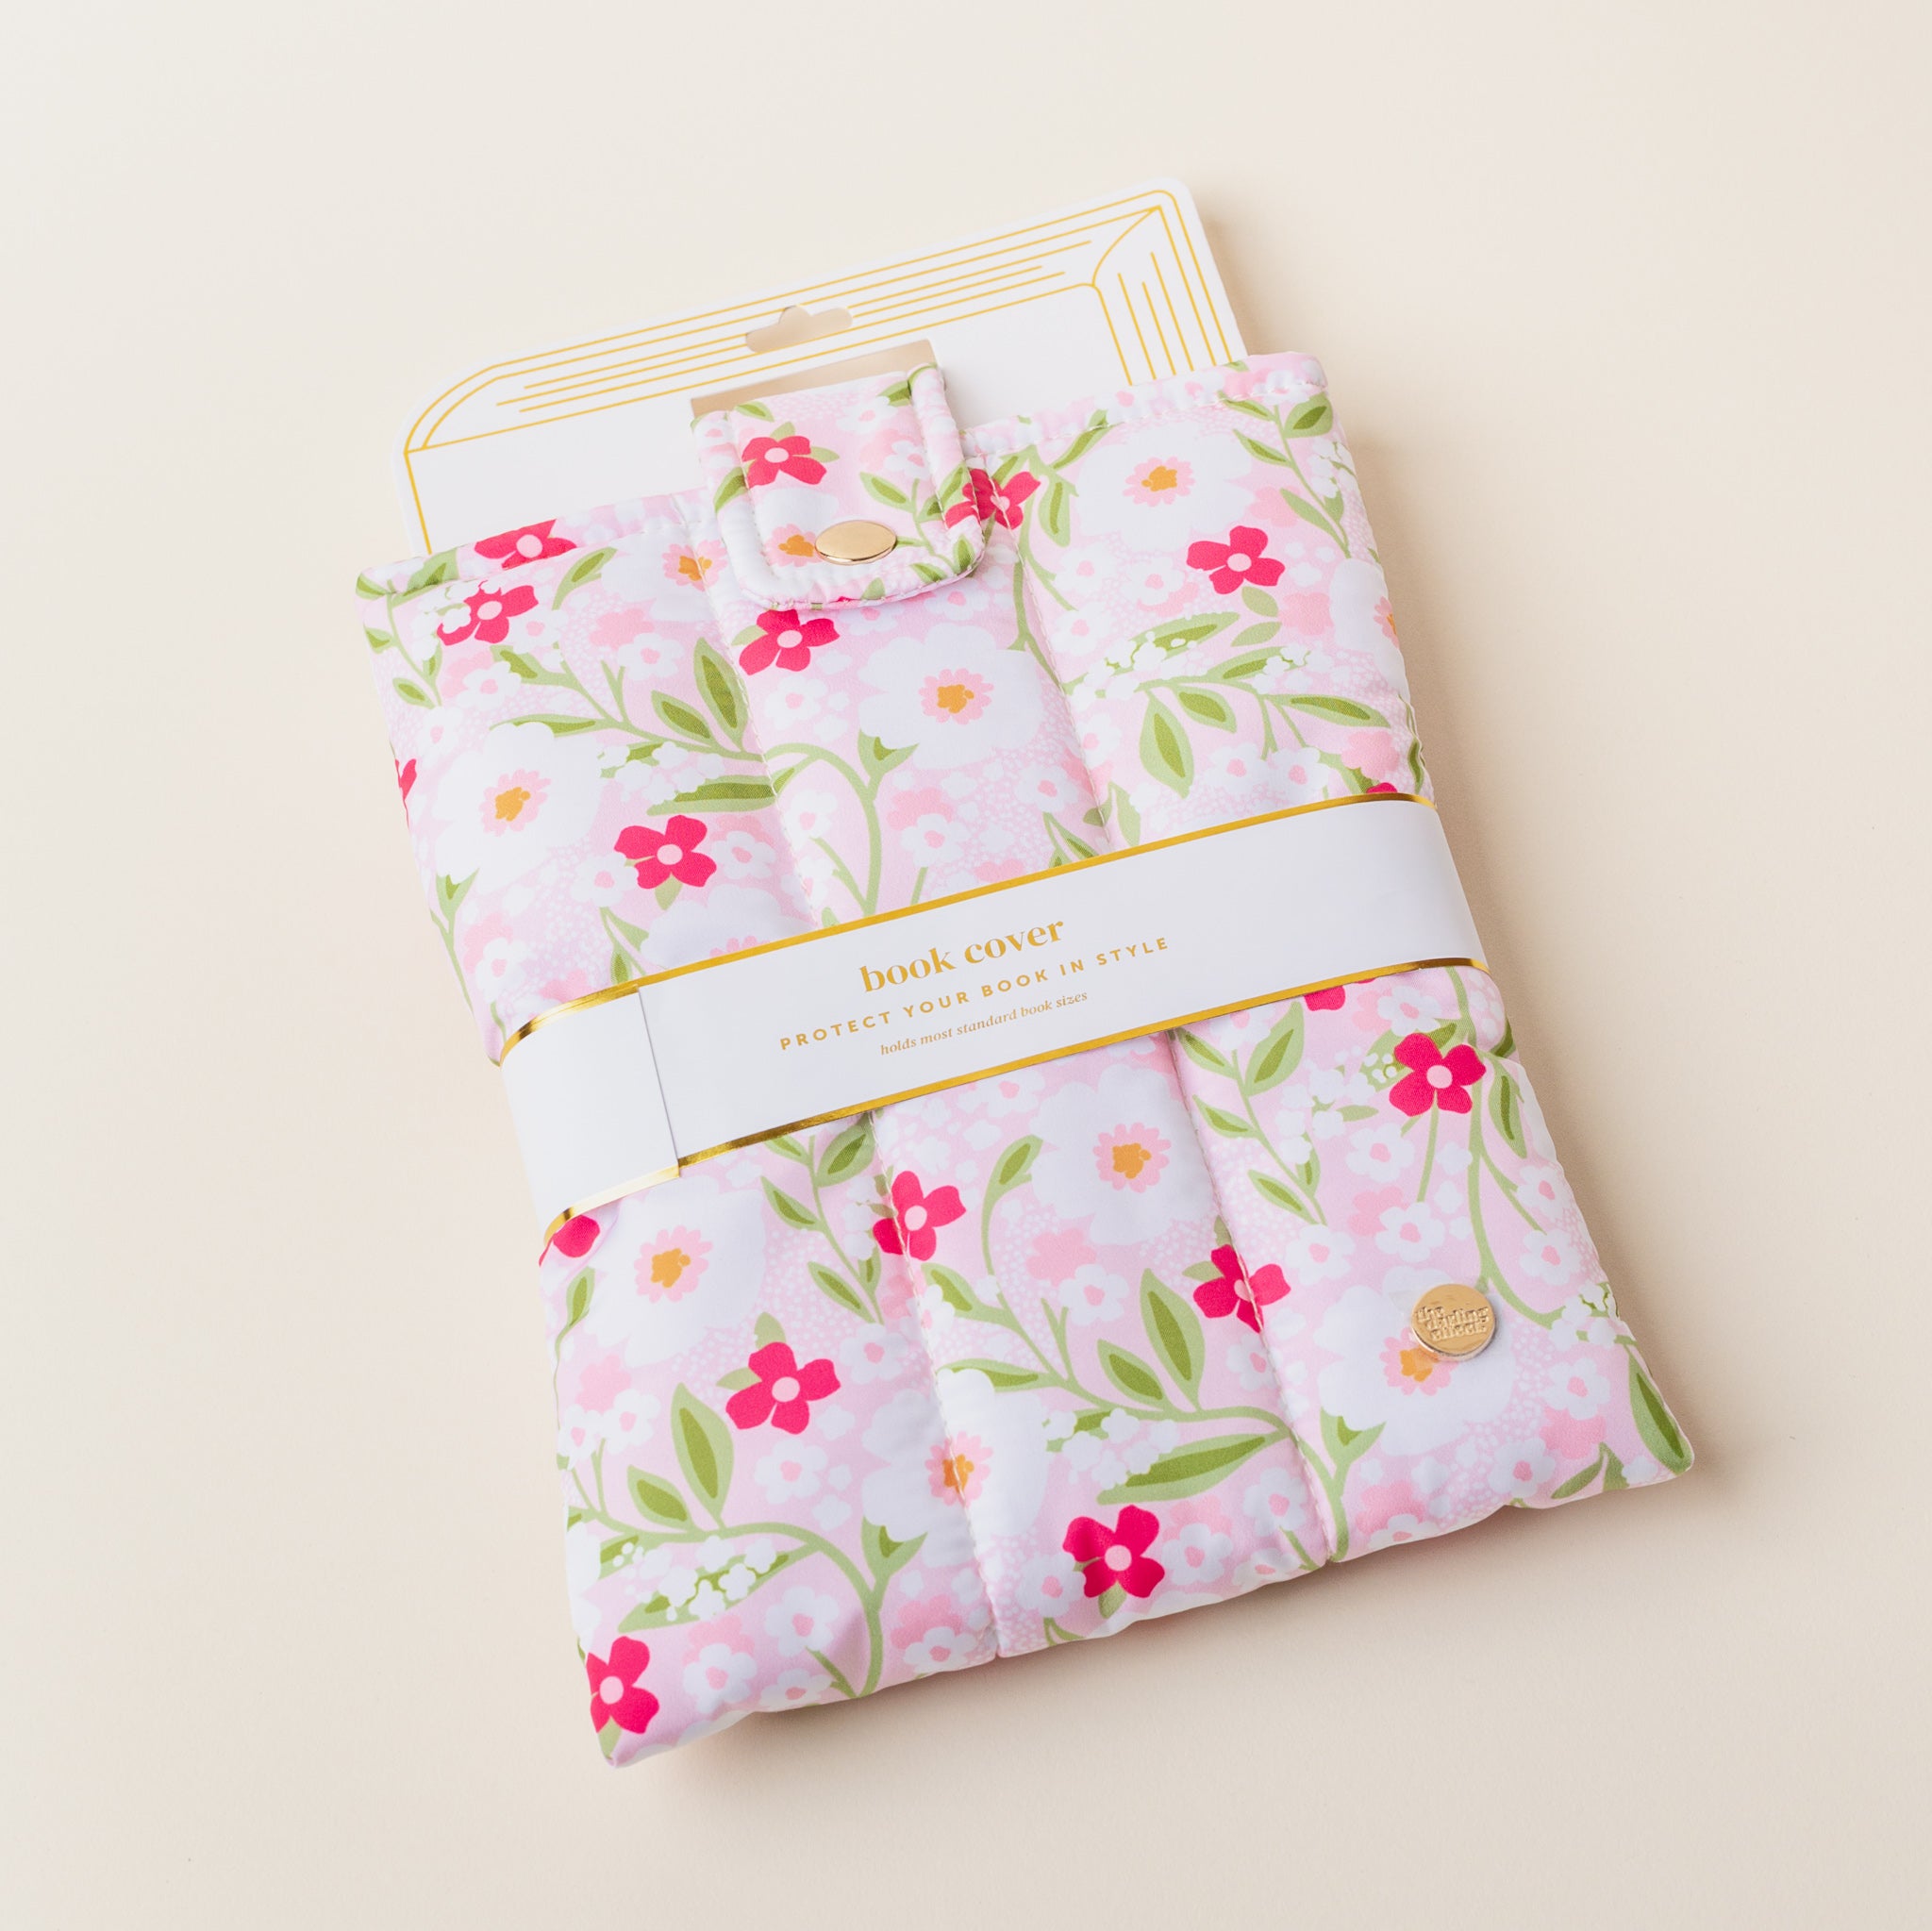 Floral Haven Book Cover